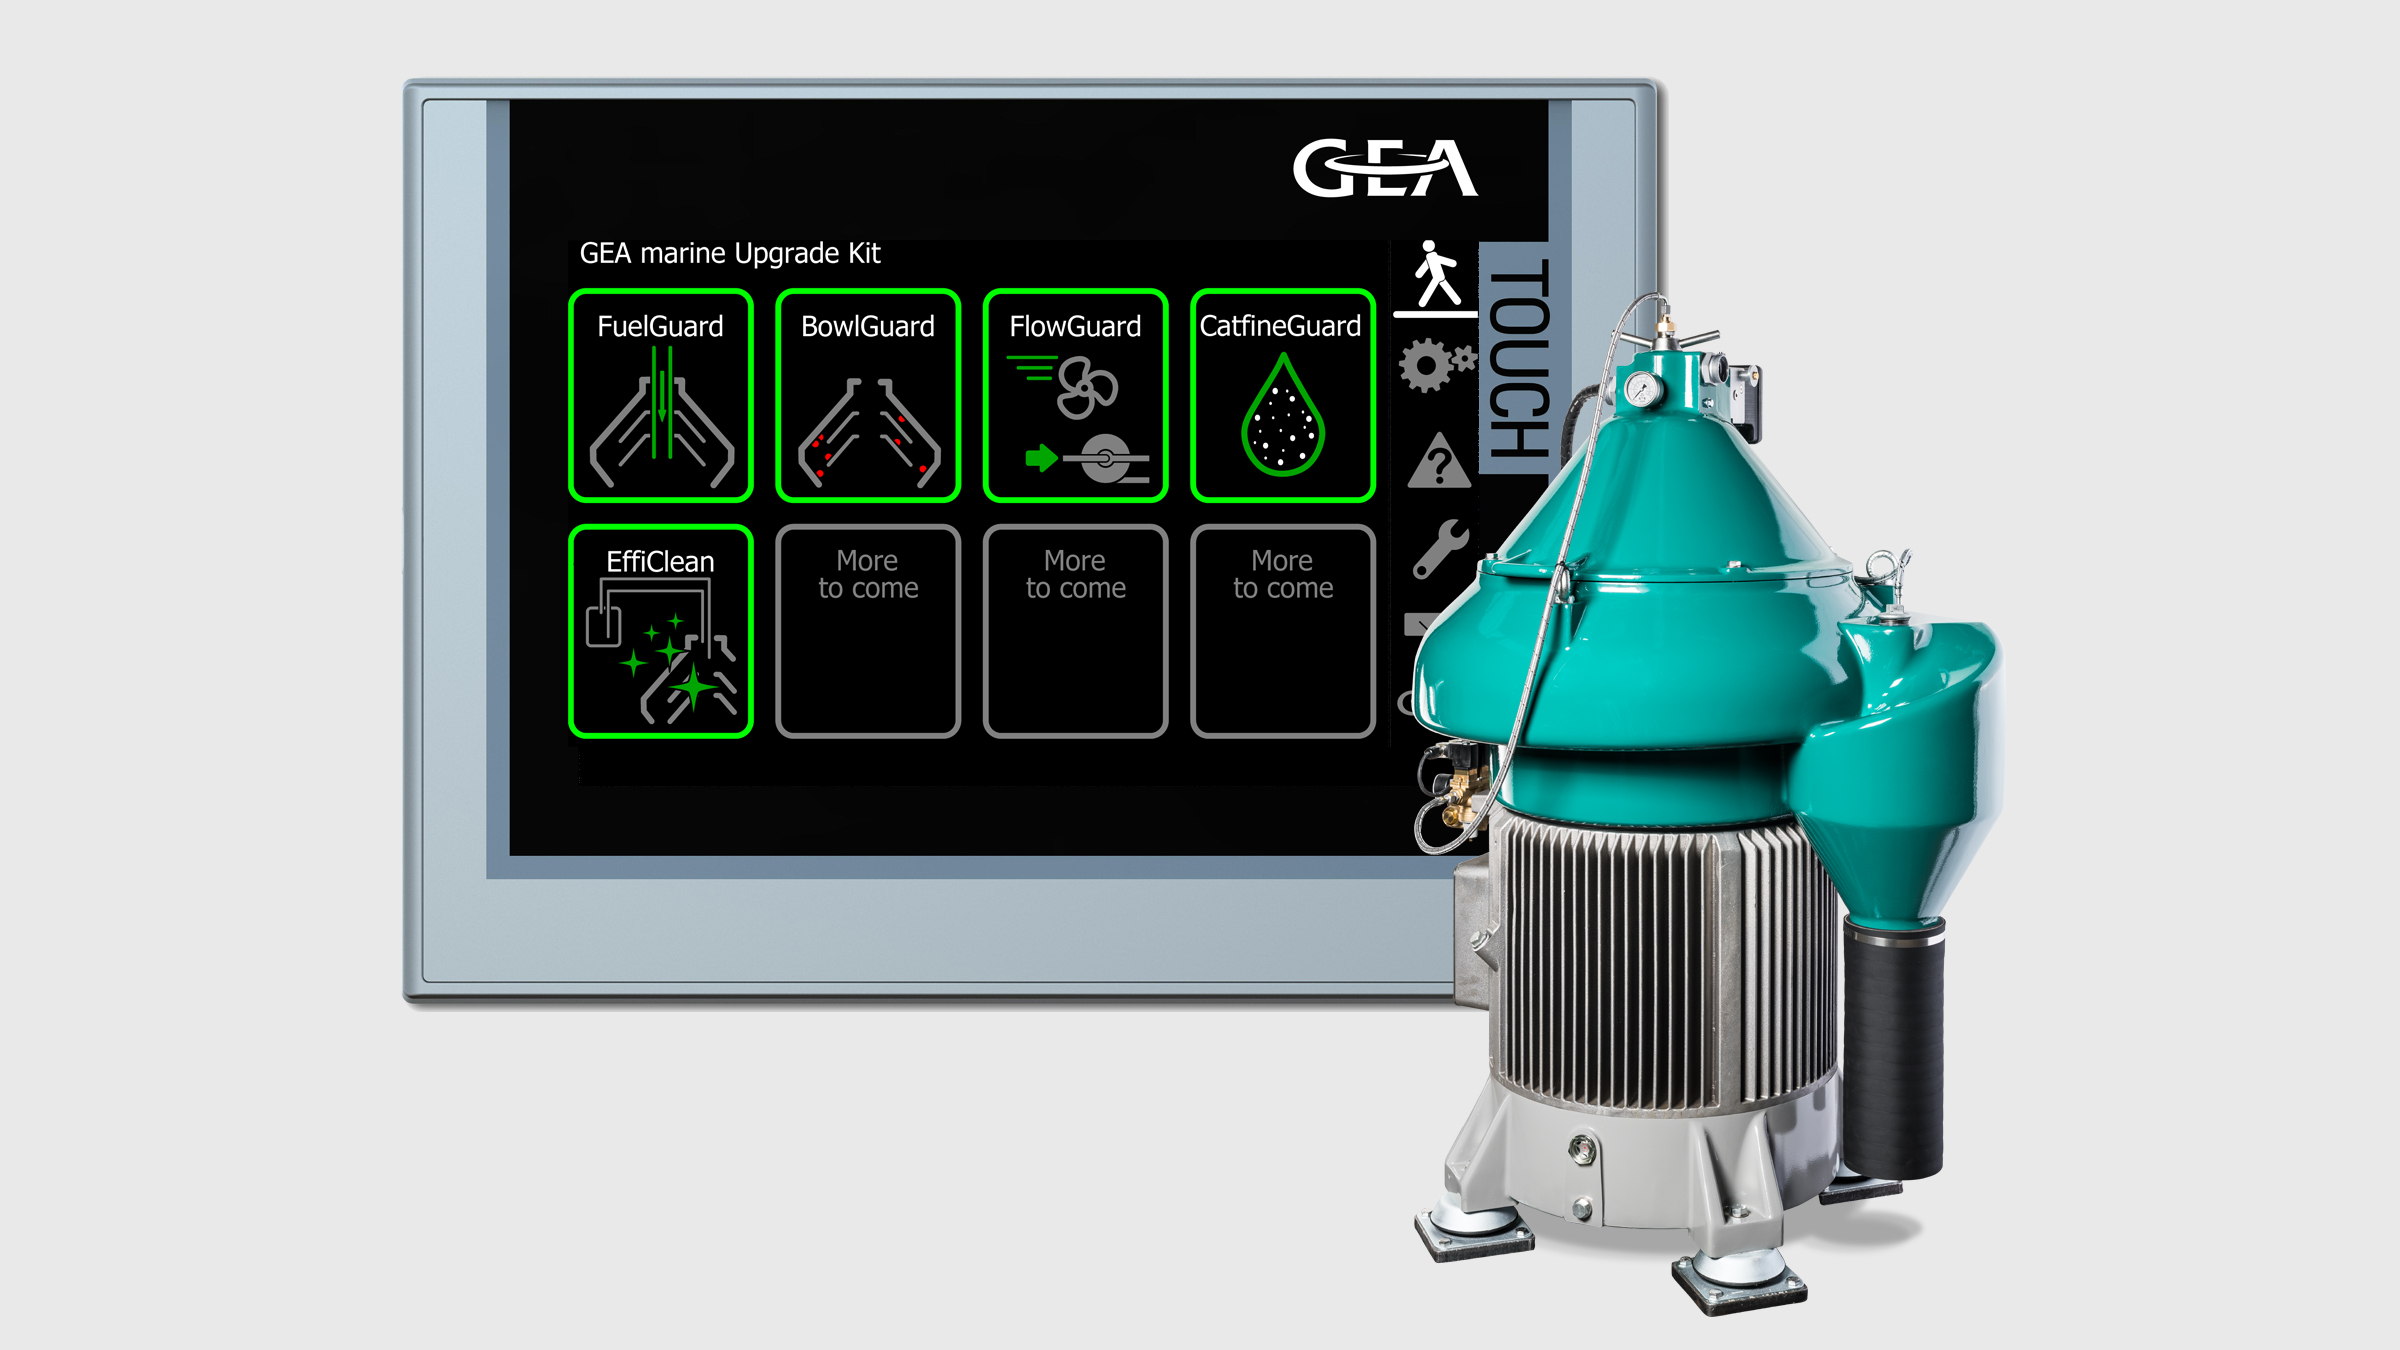 GEA automates the functionality of its separators for marine applications with a new Upgrade Kit, offering cost savings, safe operation and an improved CO₂ balance.